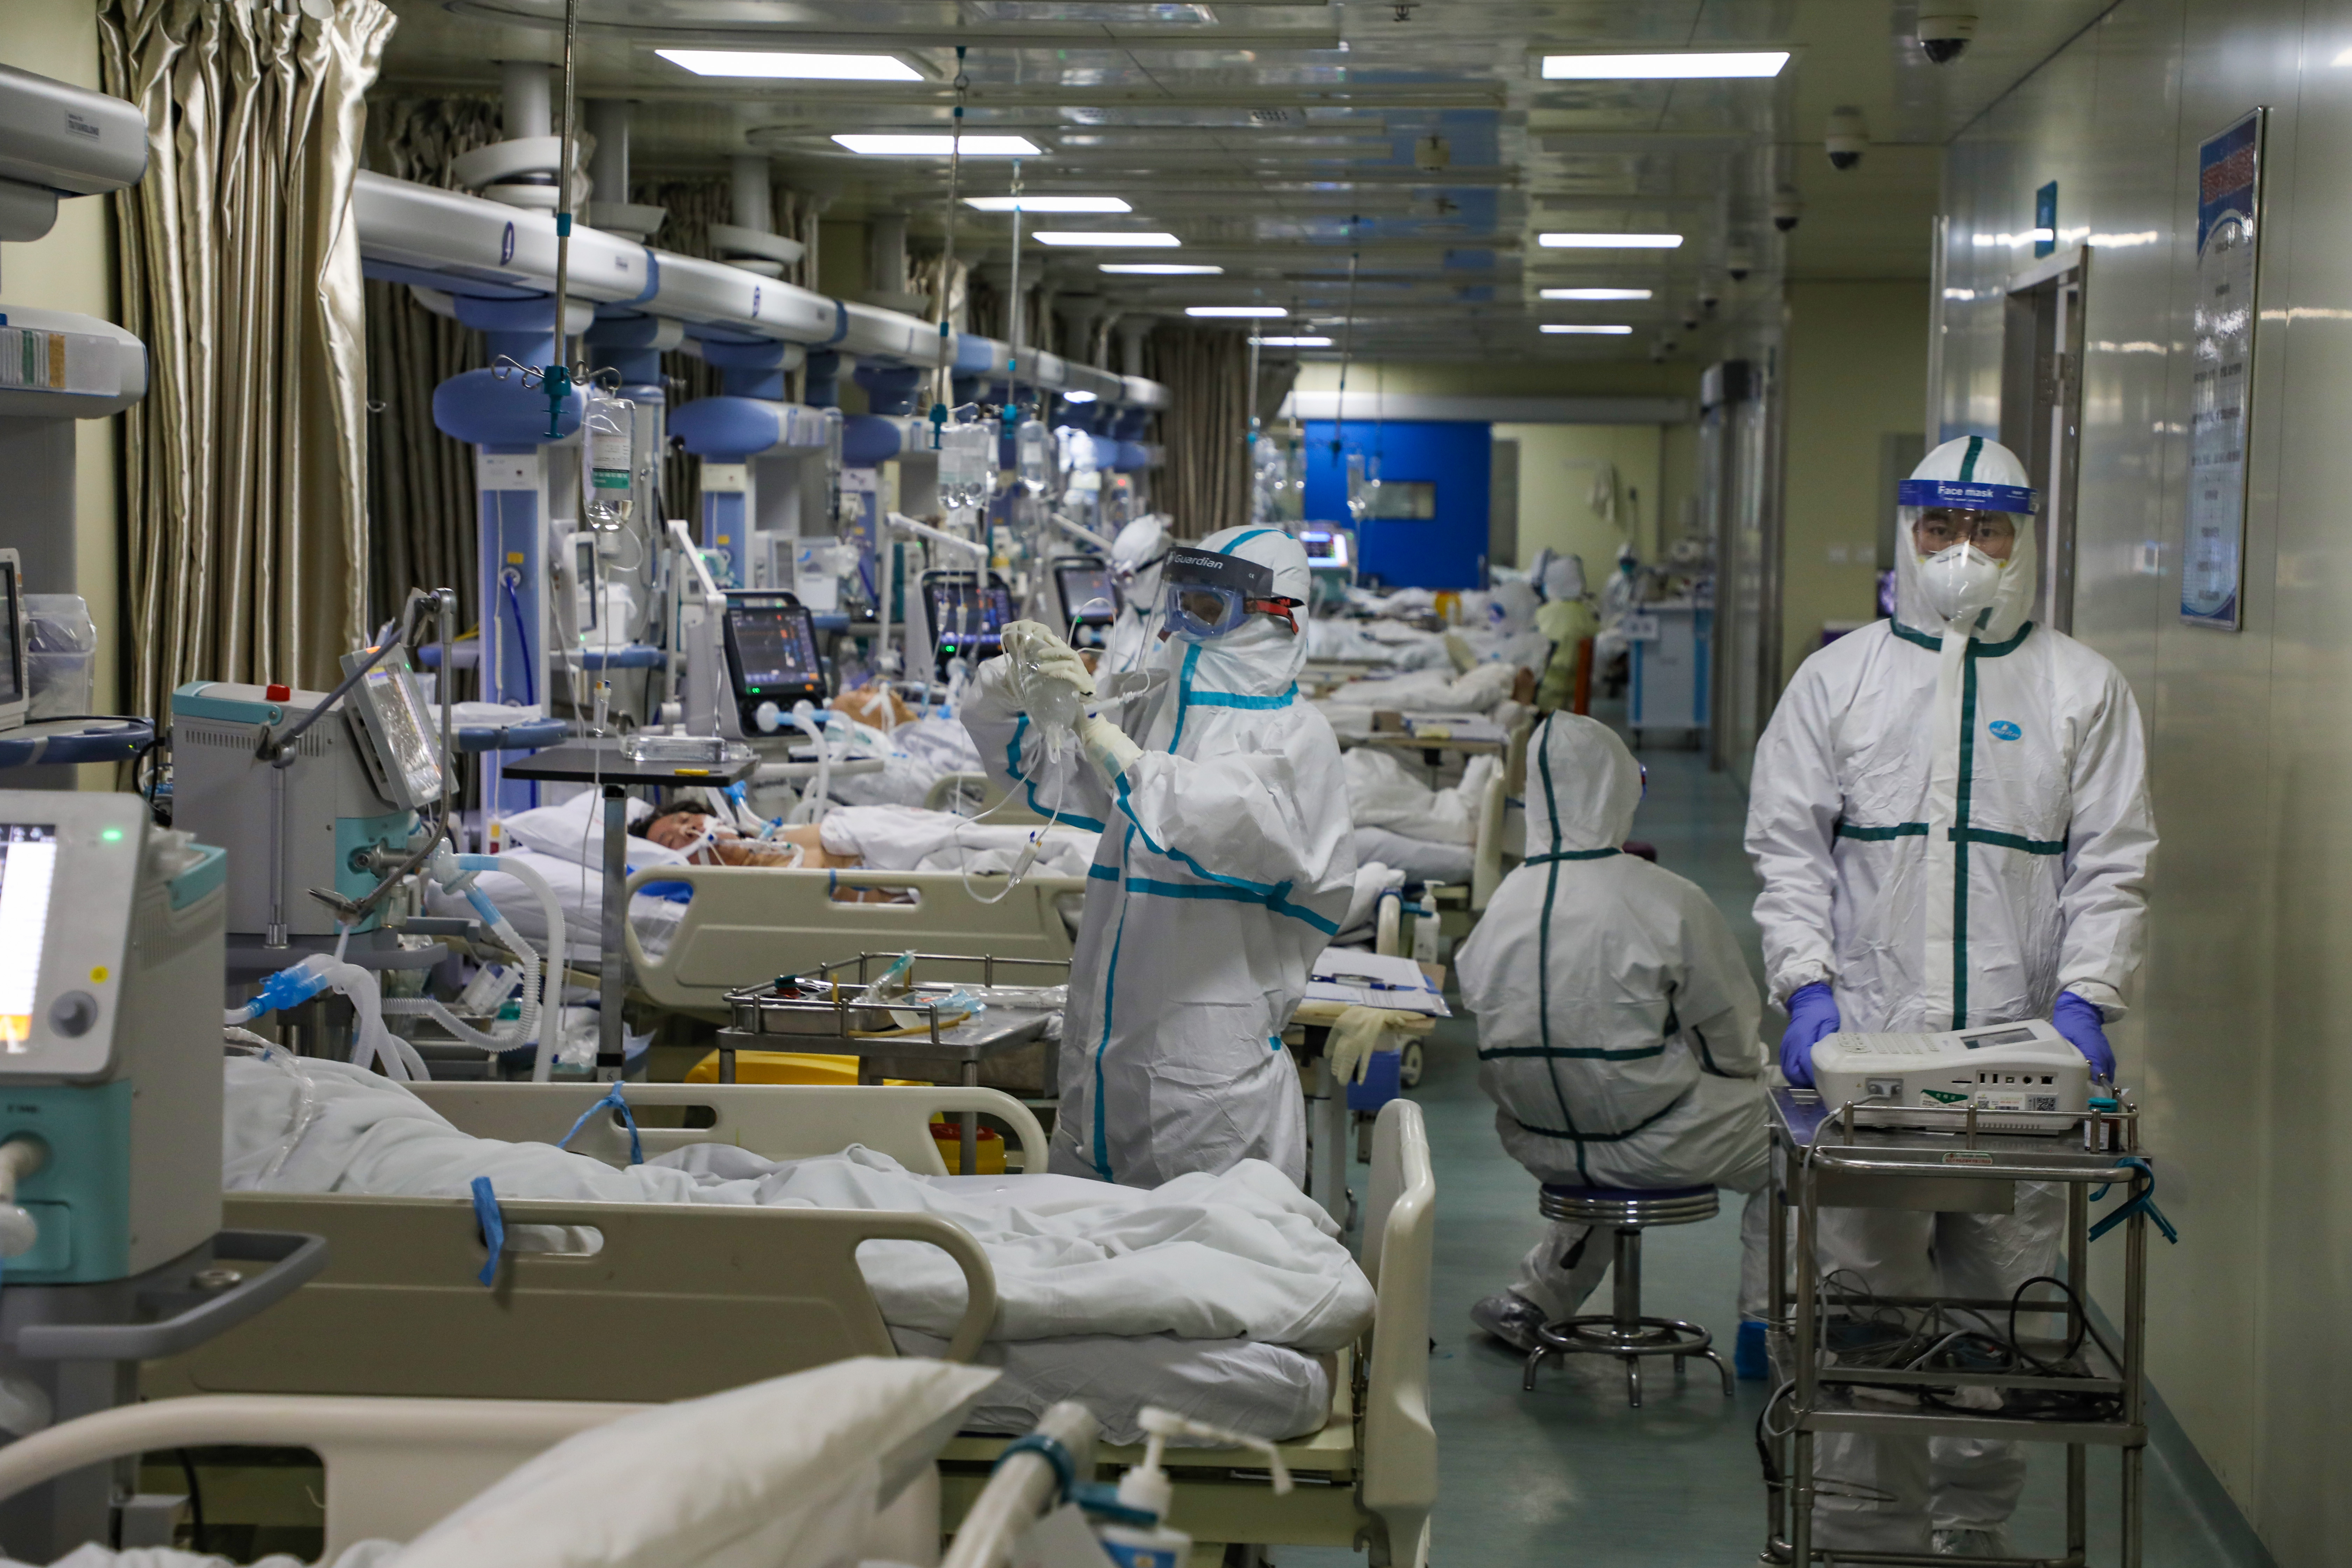 Medical workers staff a hospital in China during the pandemic